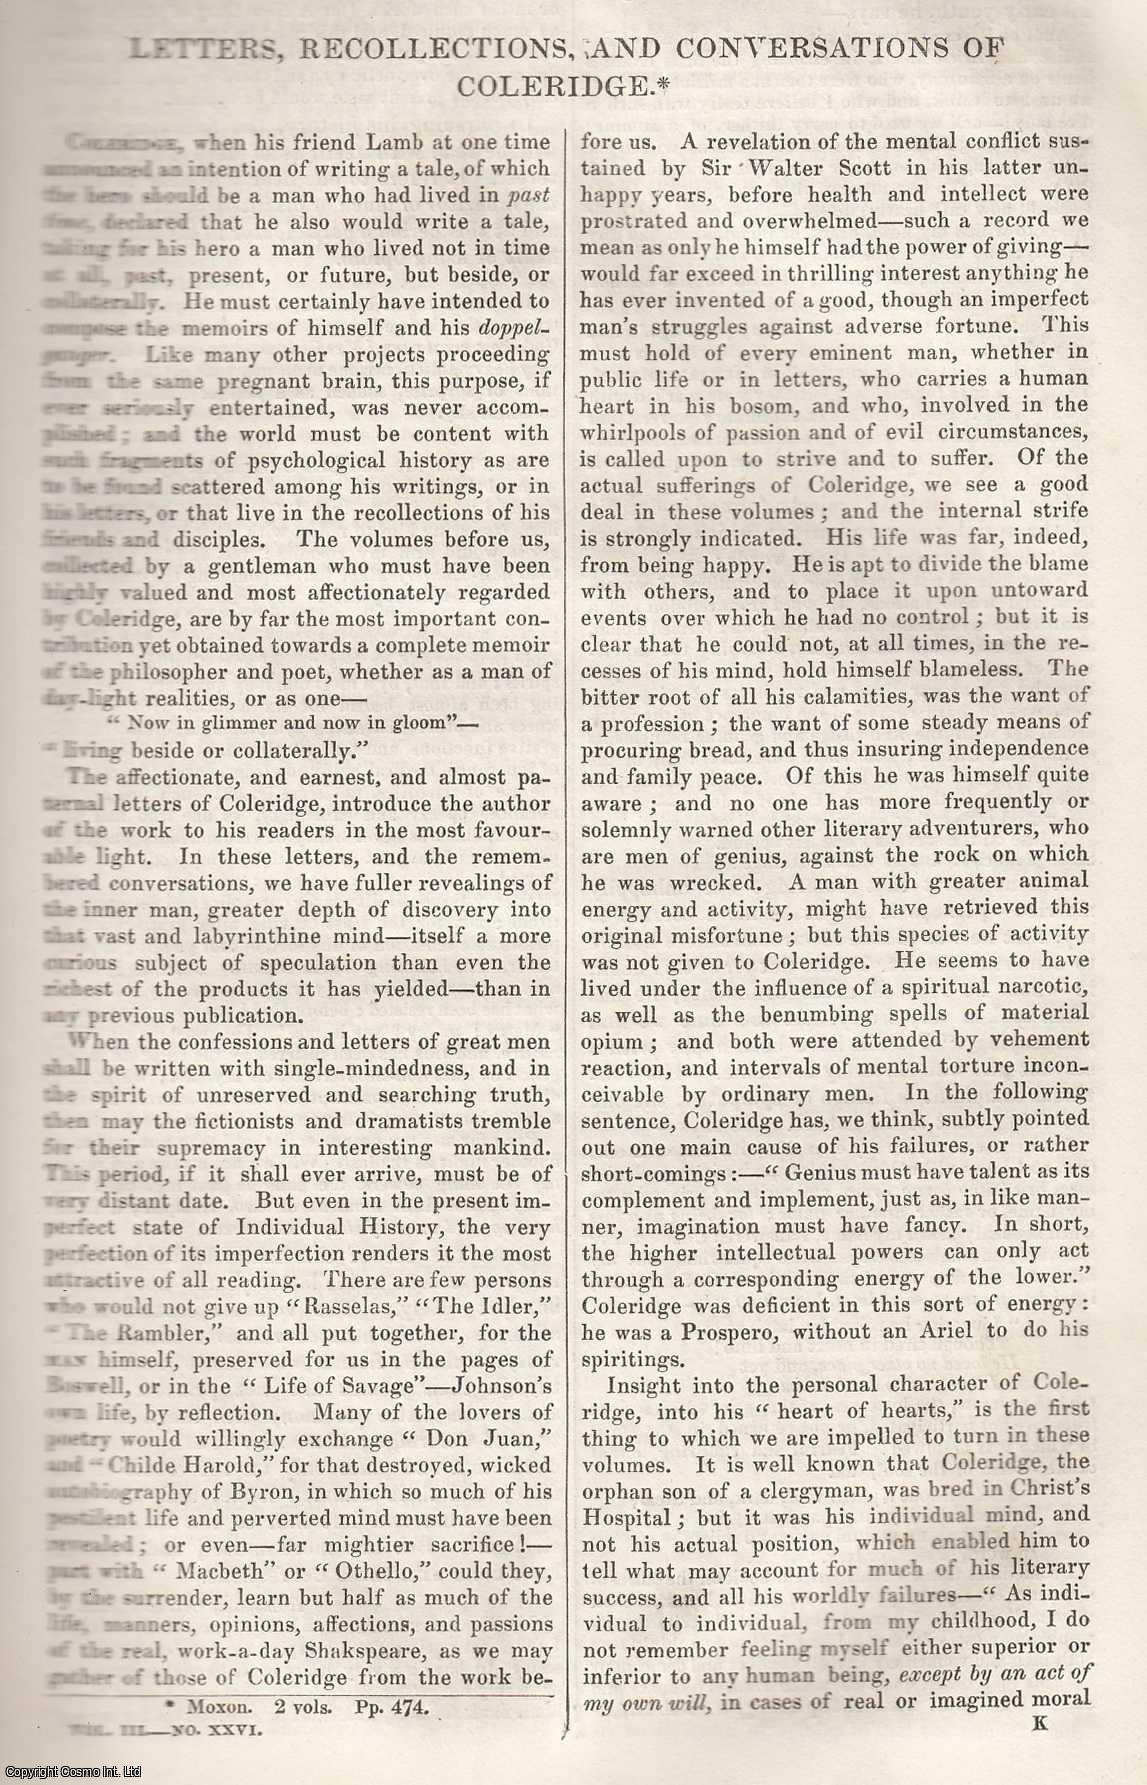 Johnstone, Christian - Letters, Recollections, and Conversations of Coleridge. An original article from Tait's Edinburgh Magazine, 1836.